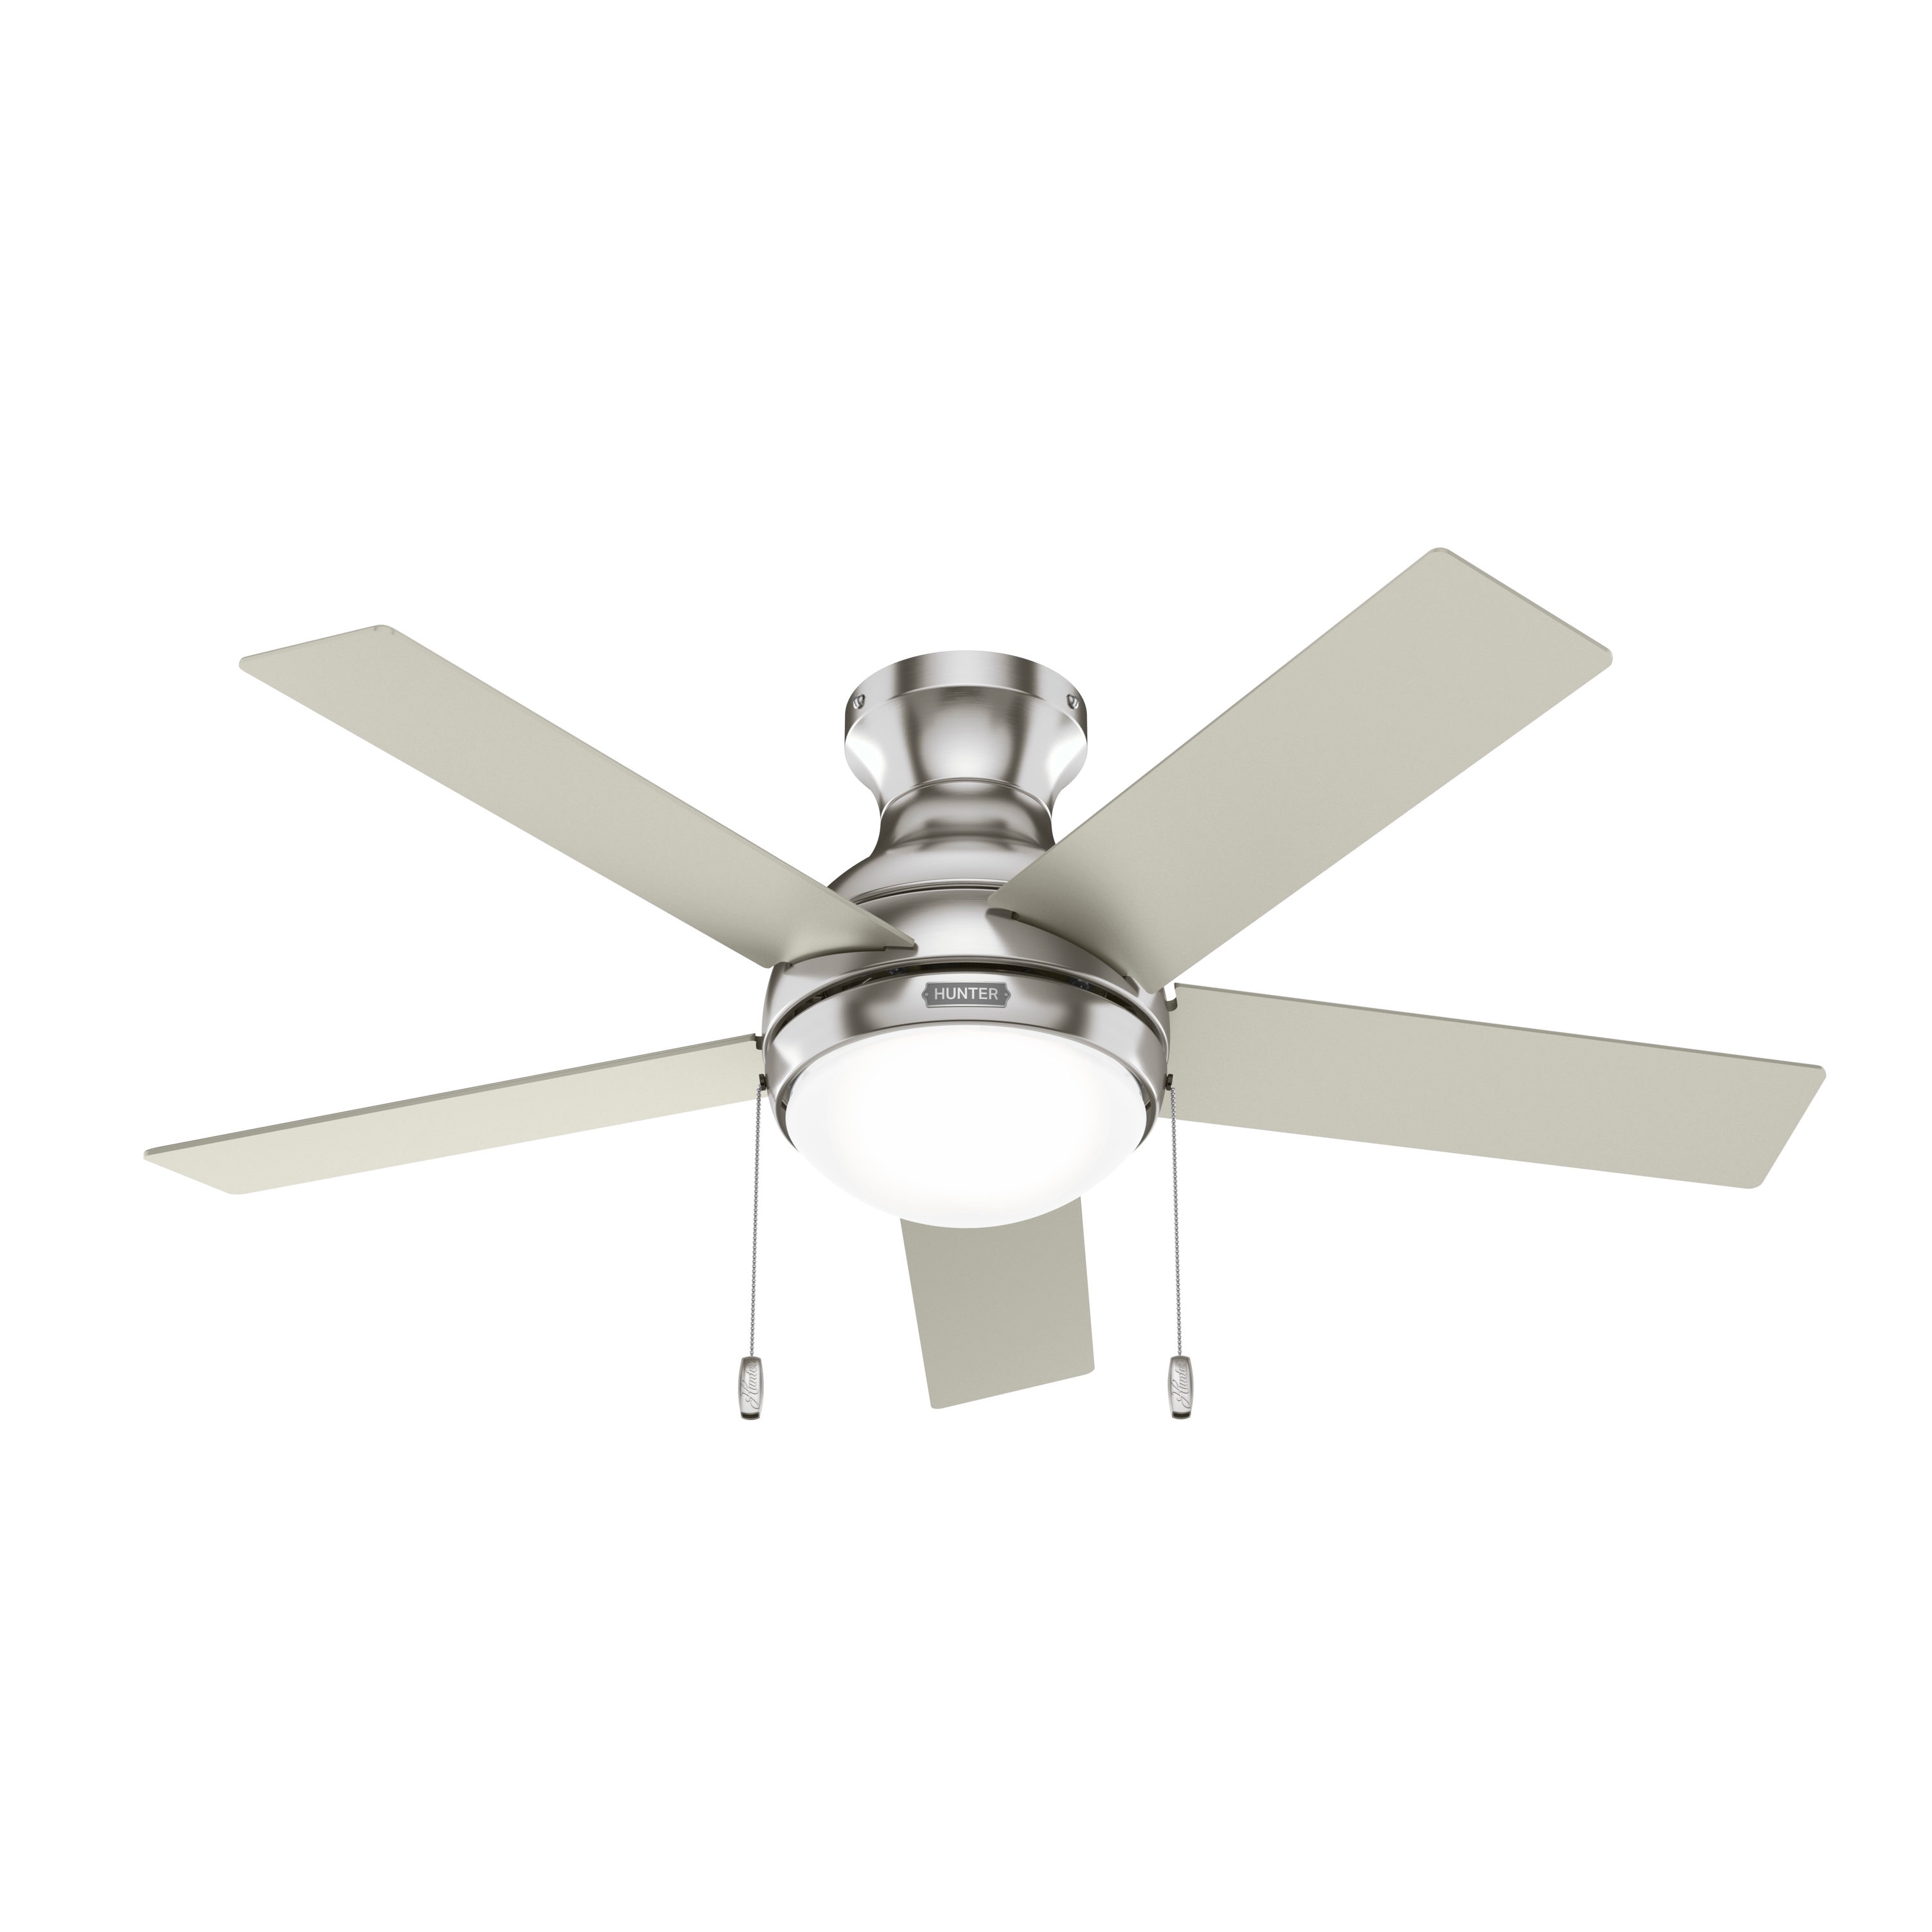 44" Hunter Ceiling Fan in Brushed Nickel with Cased White Glass Light Kit 